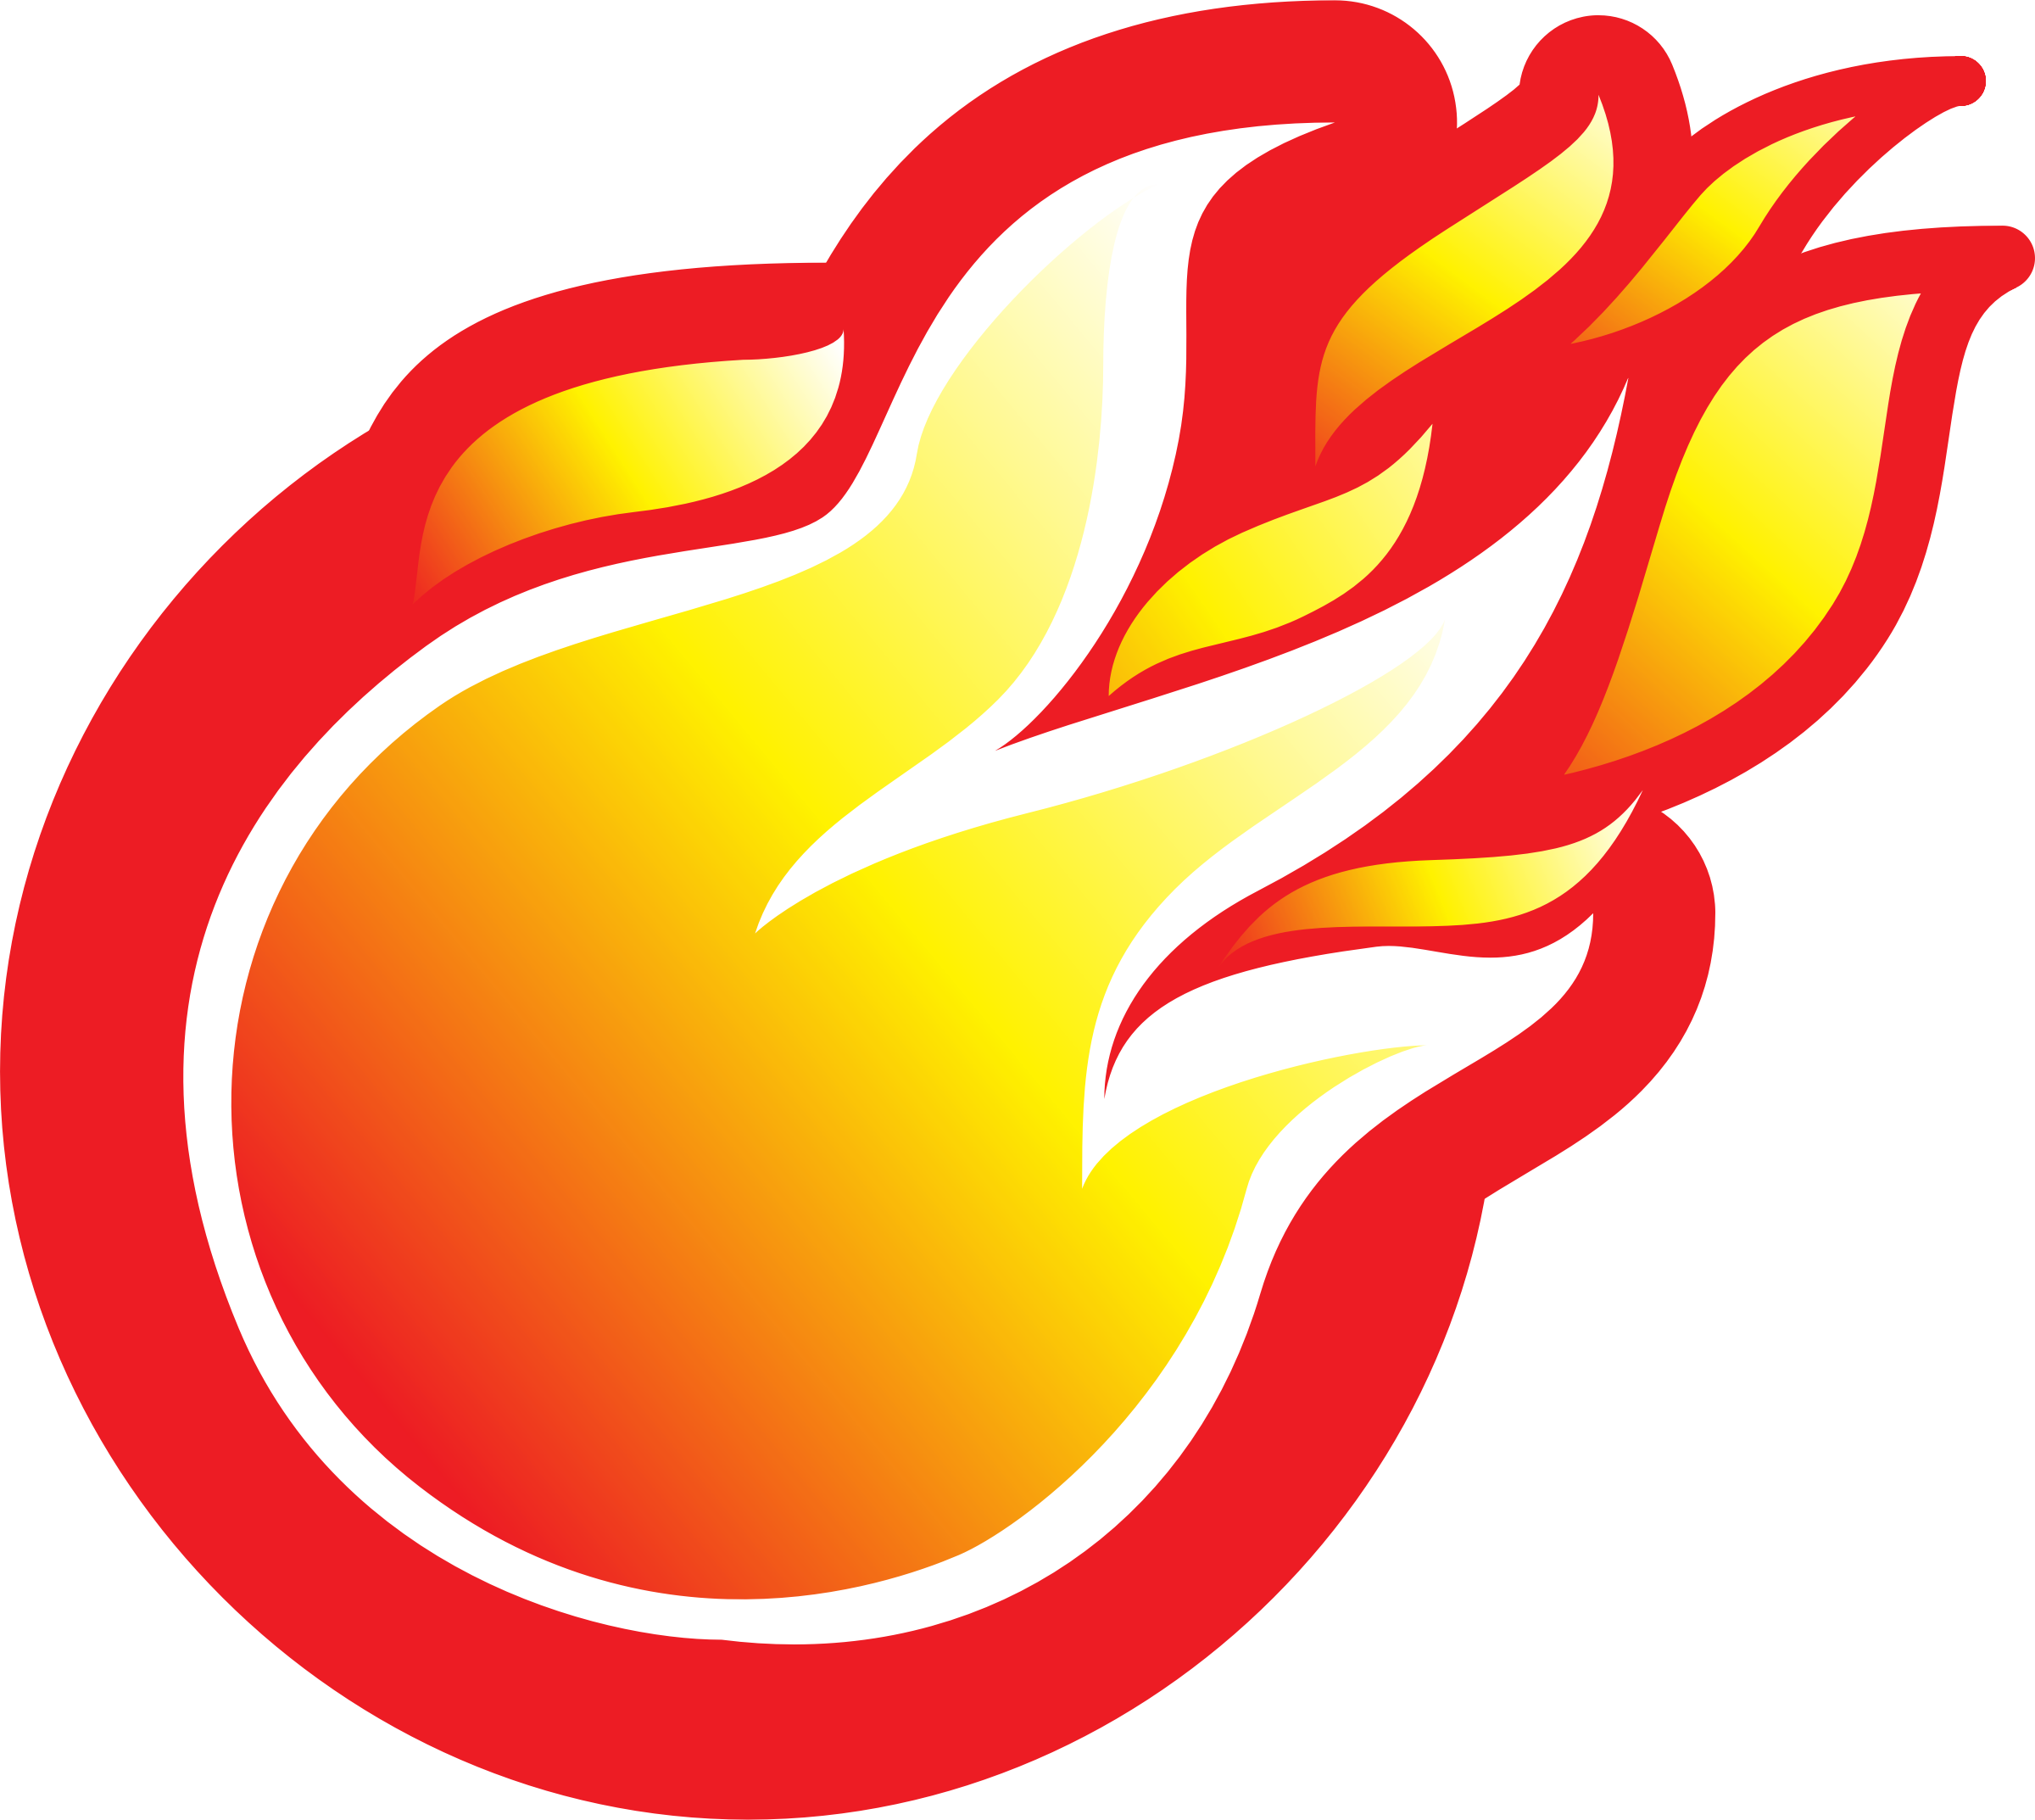 Red fire flames background clipart 